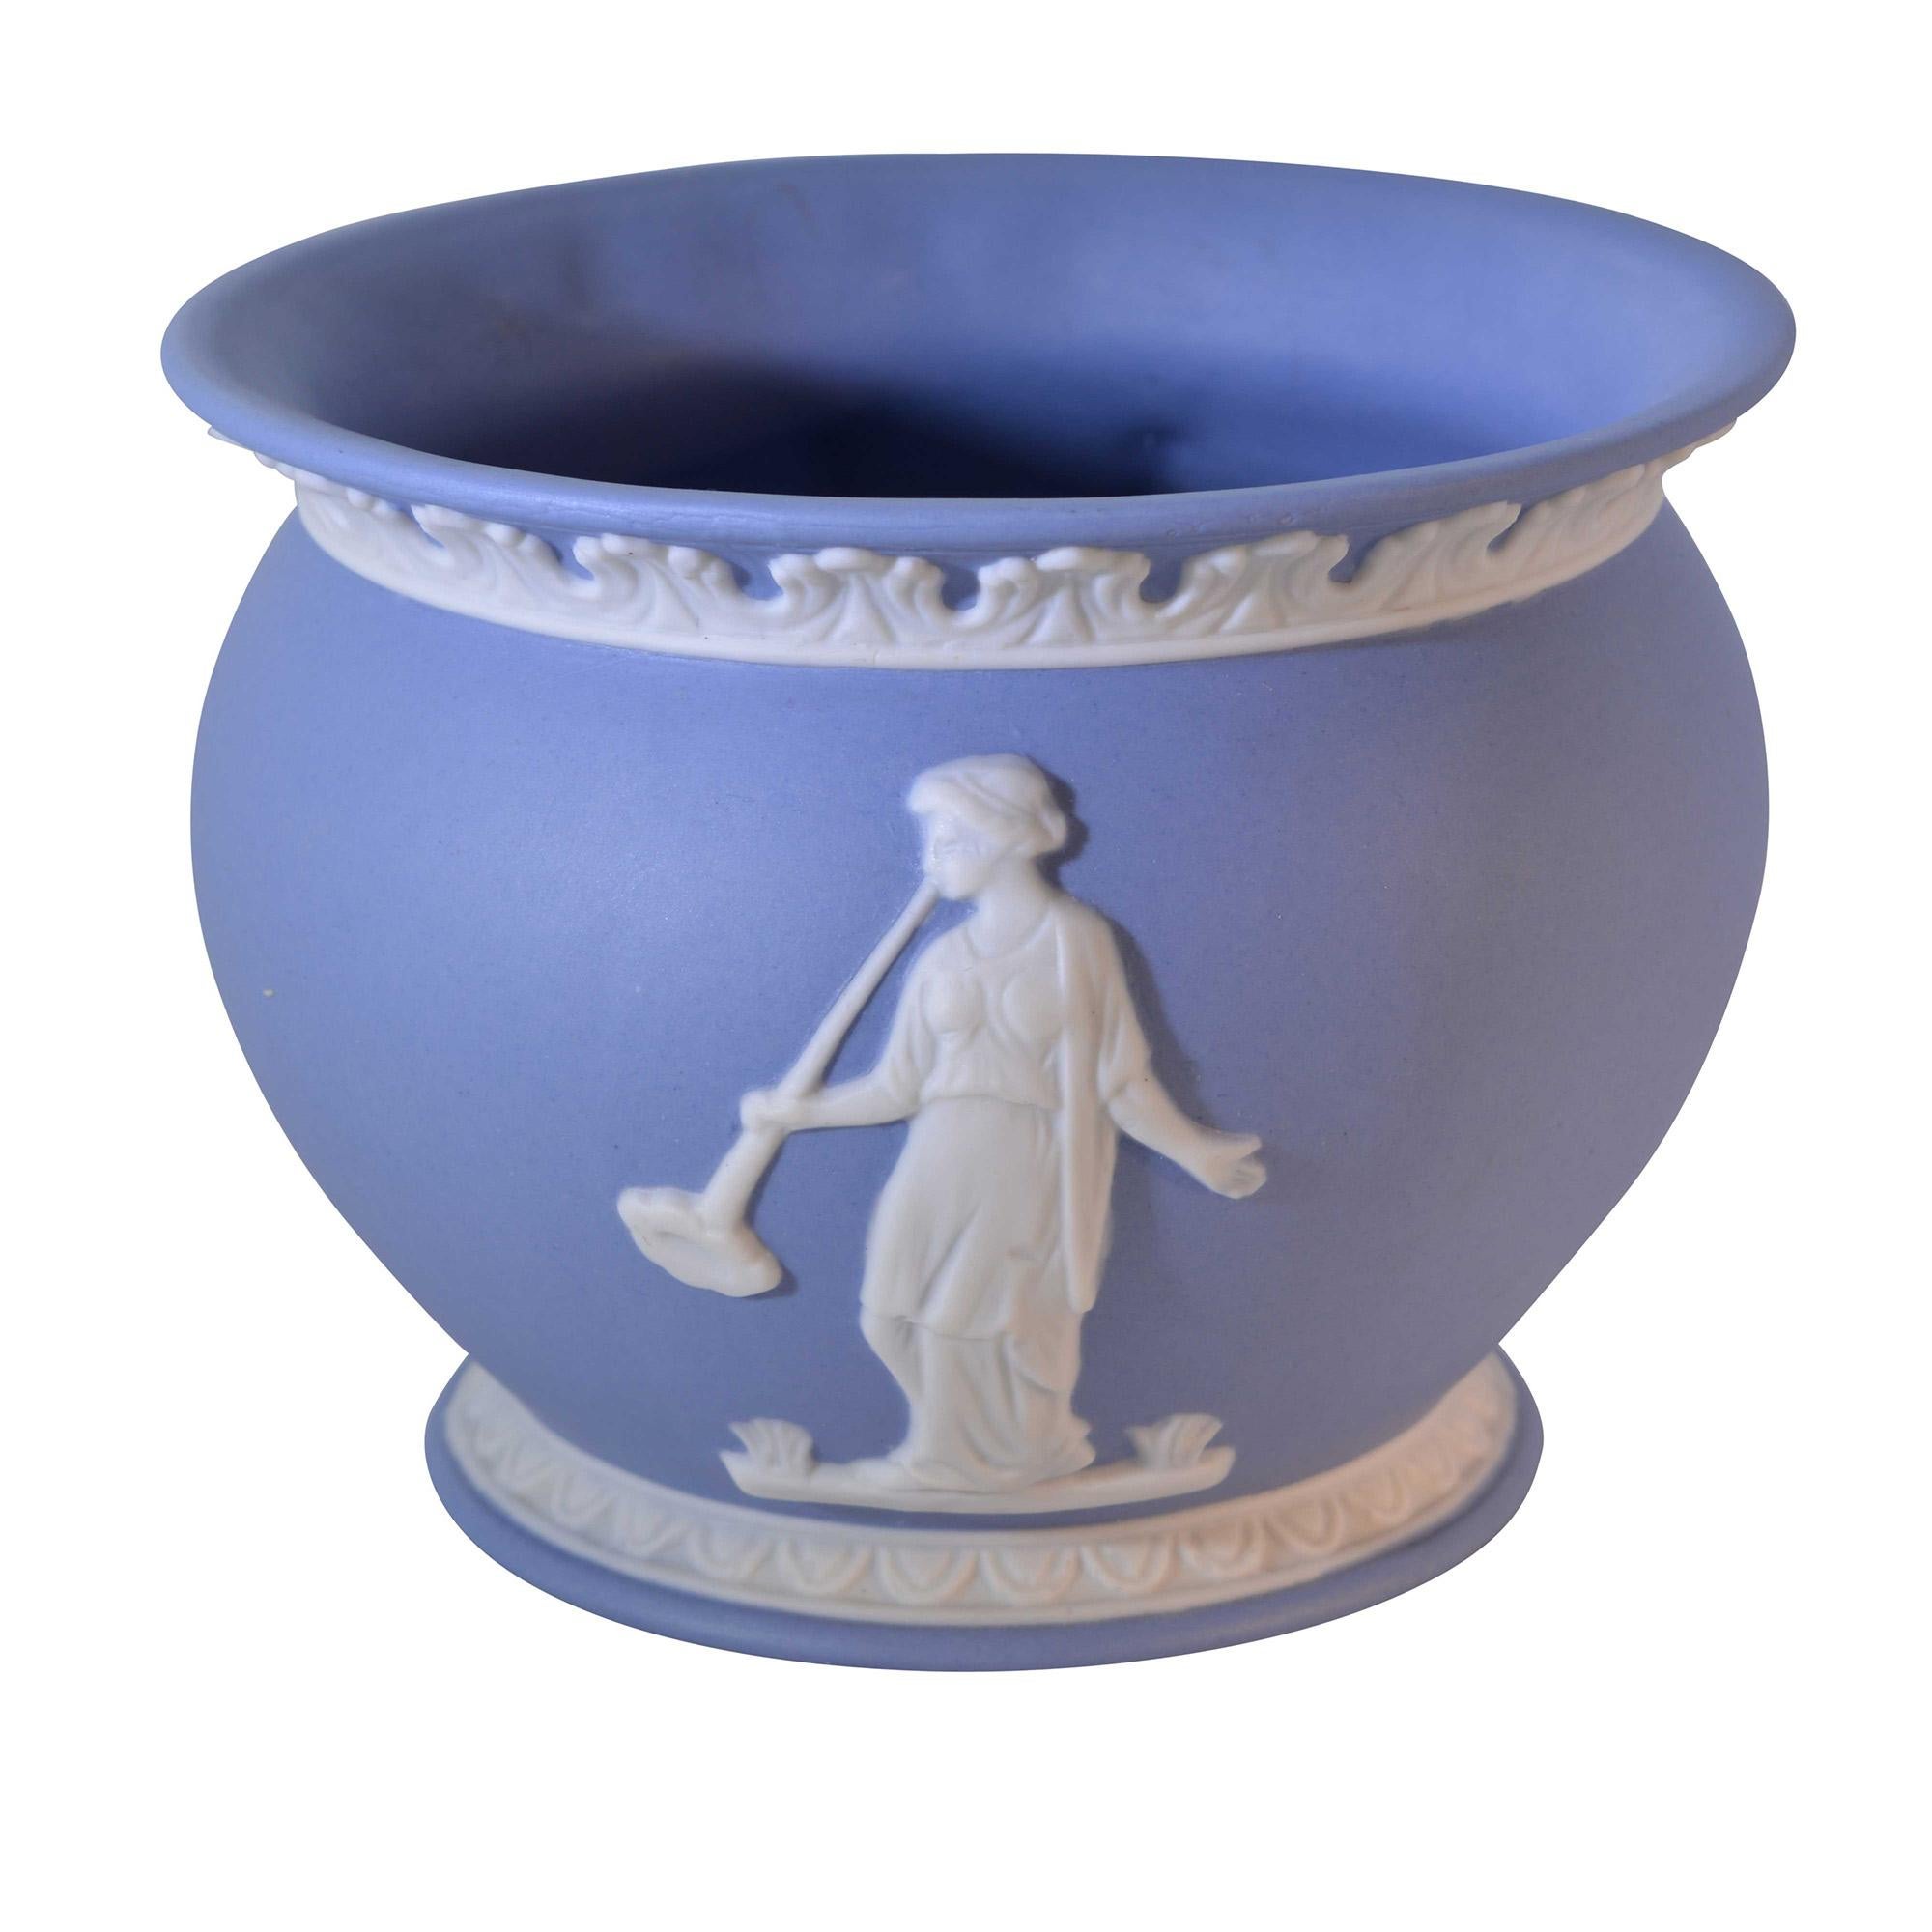 There is something about Wedgewood Jasperware that is so appealing. The soft blue base with the ivory white detail is just so elegant. This vase has a detailed rim and both front and back have raised detail depicting Grecian goddess. 

Dimensions: